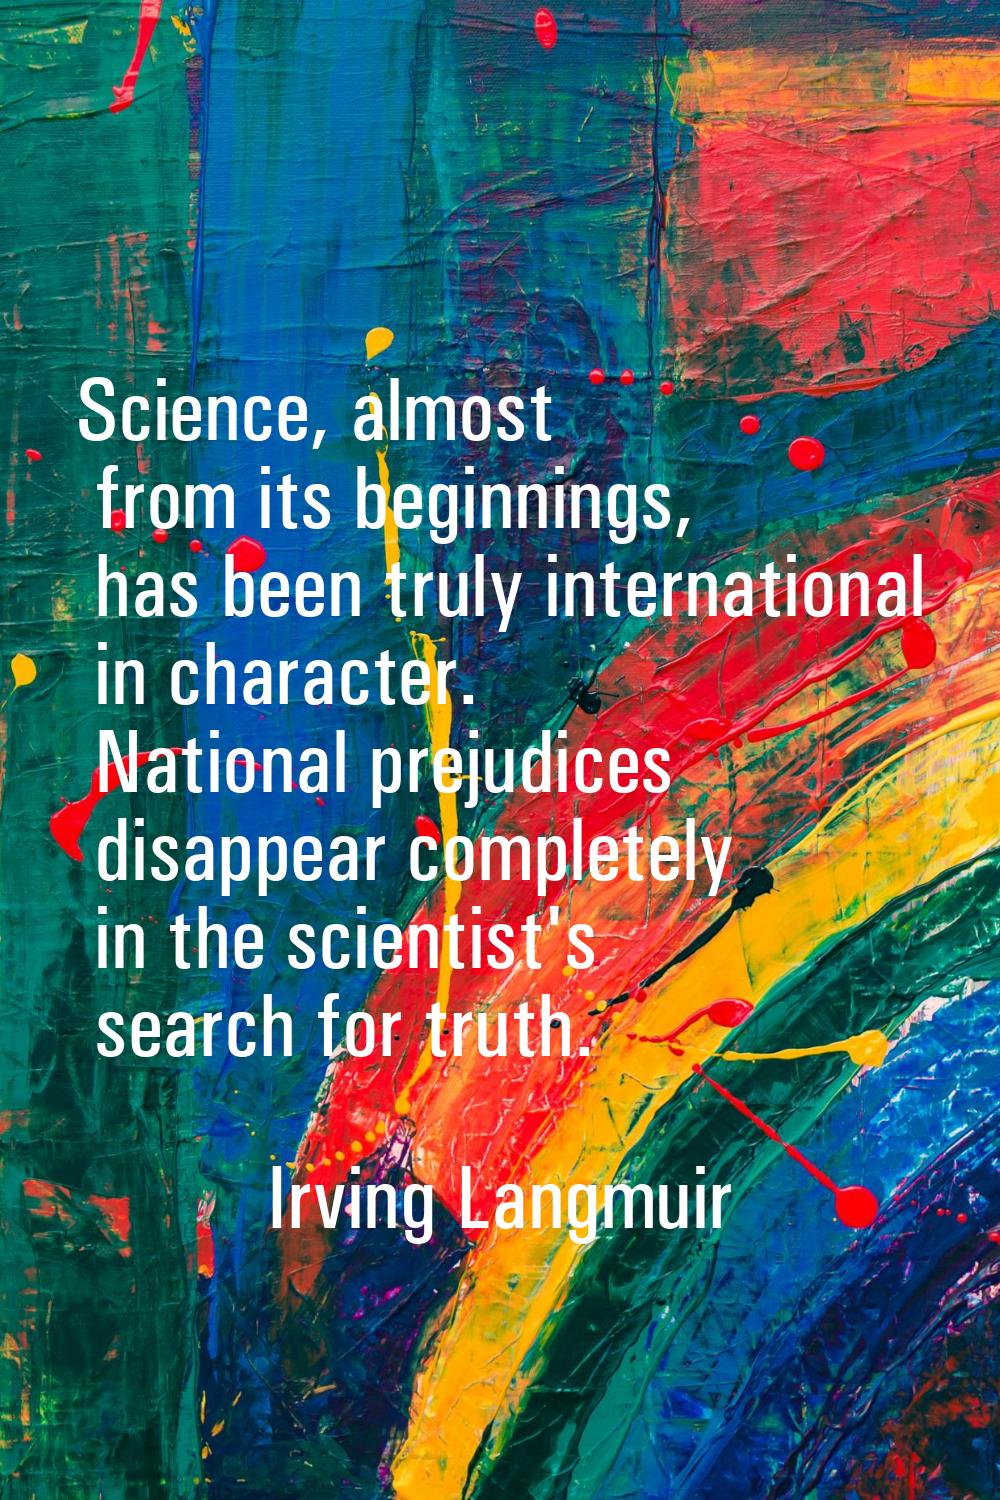 Science, almost from its beginnings, has been truly international in character. National prejudices